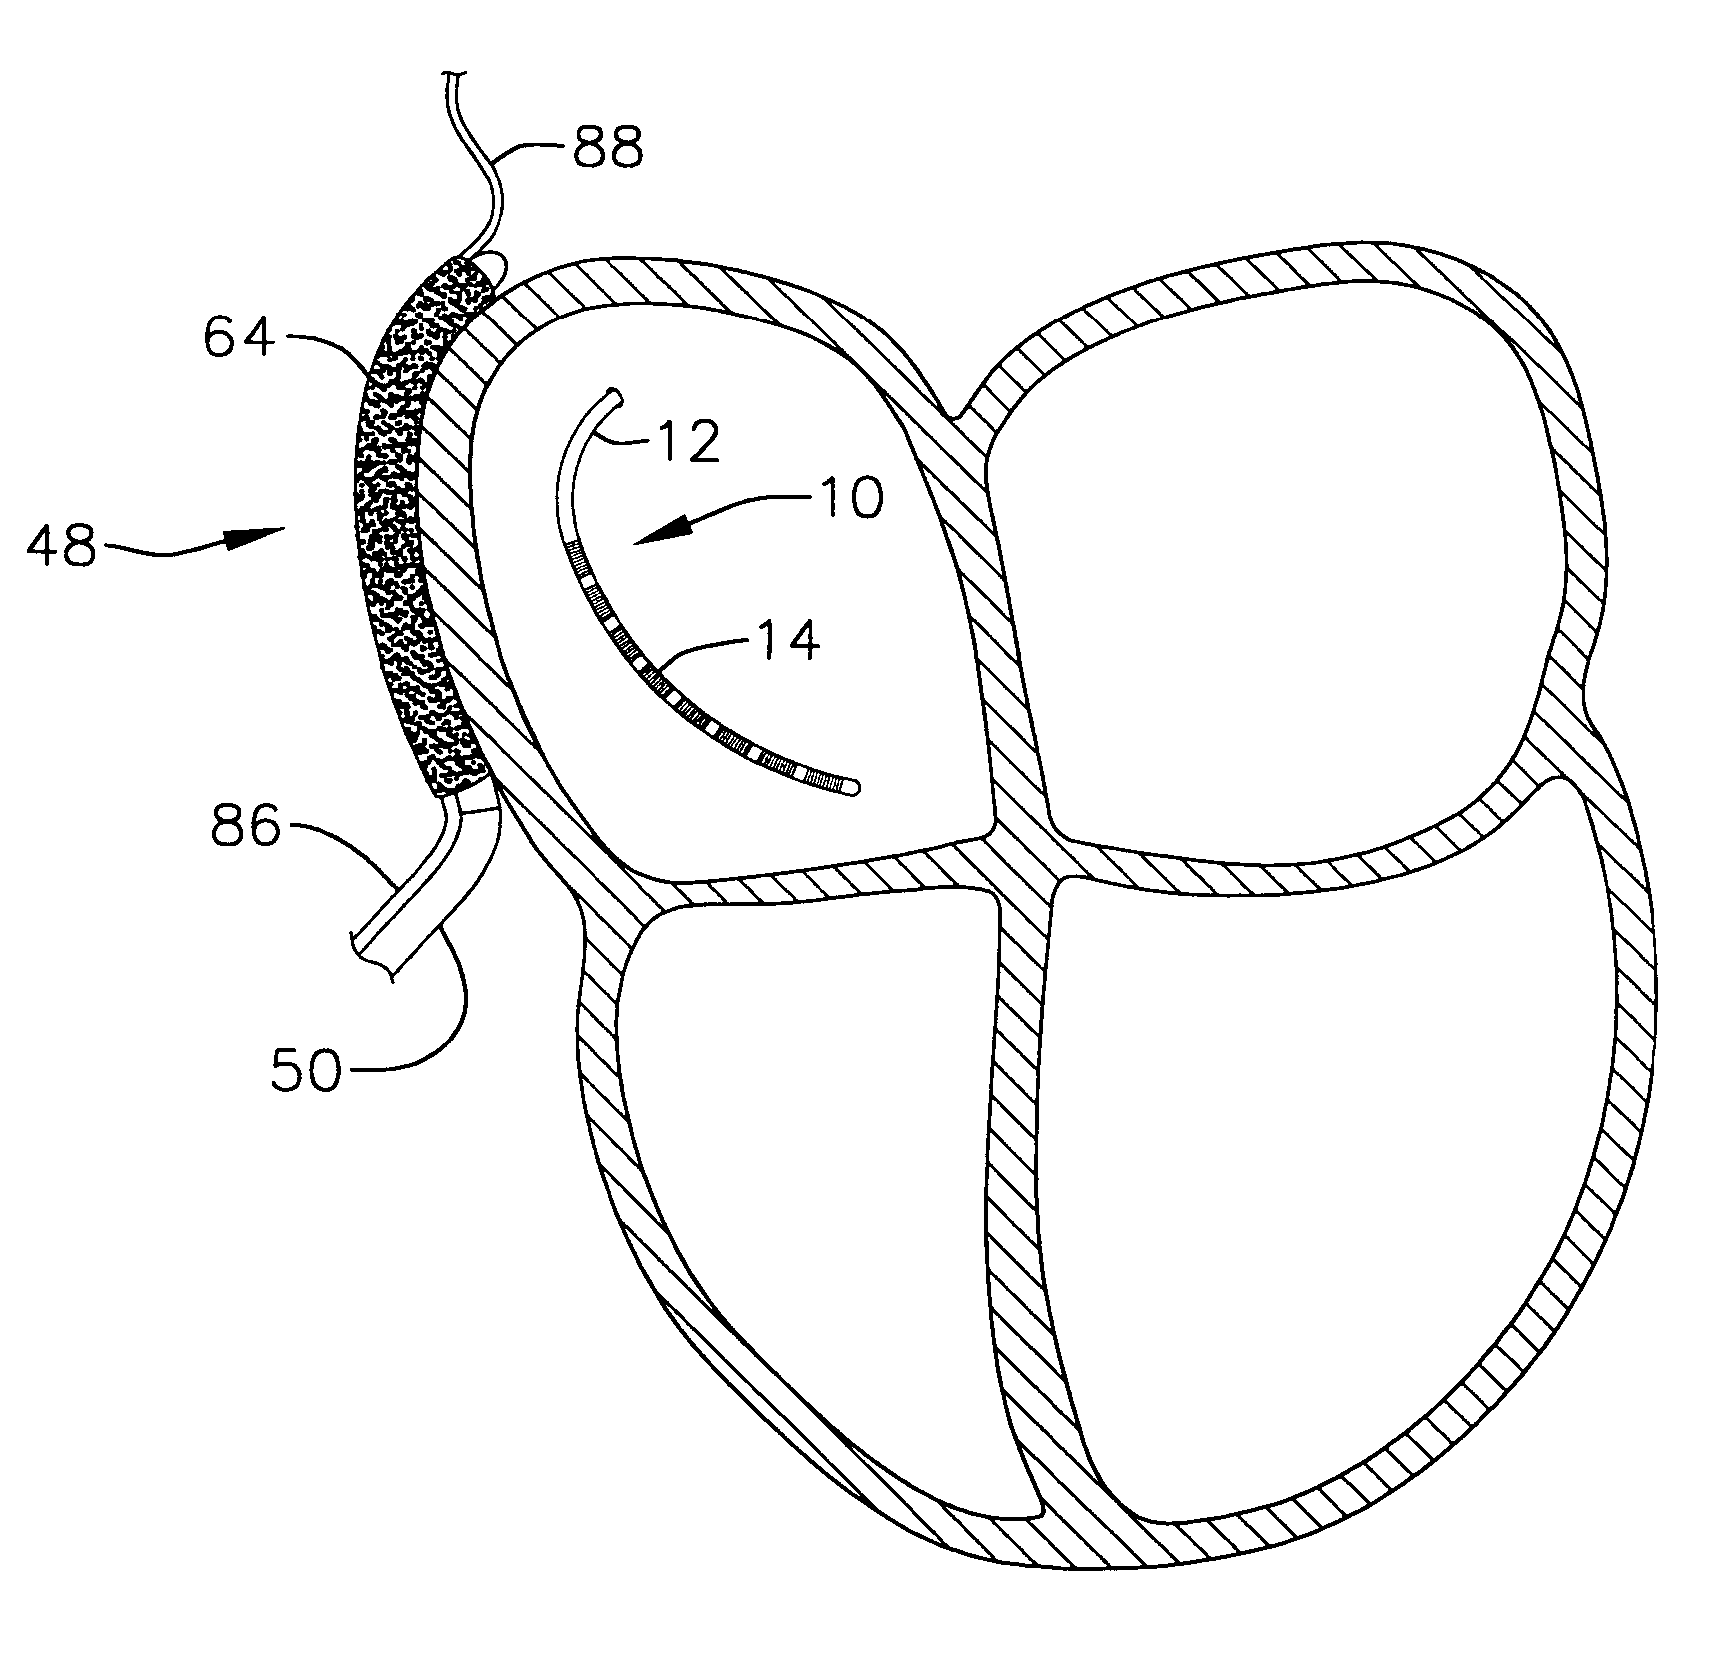 Internal indifferent electrode device for use with lesion creation apparatus and method of forming lesions using the same